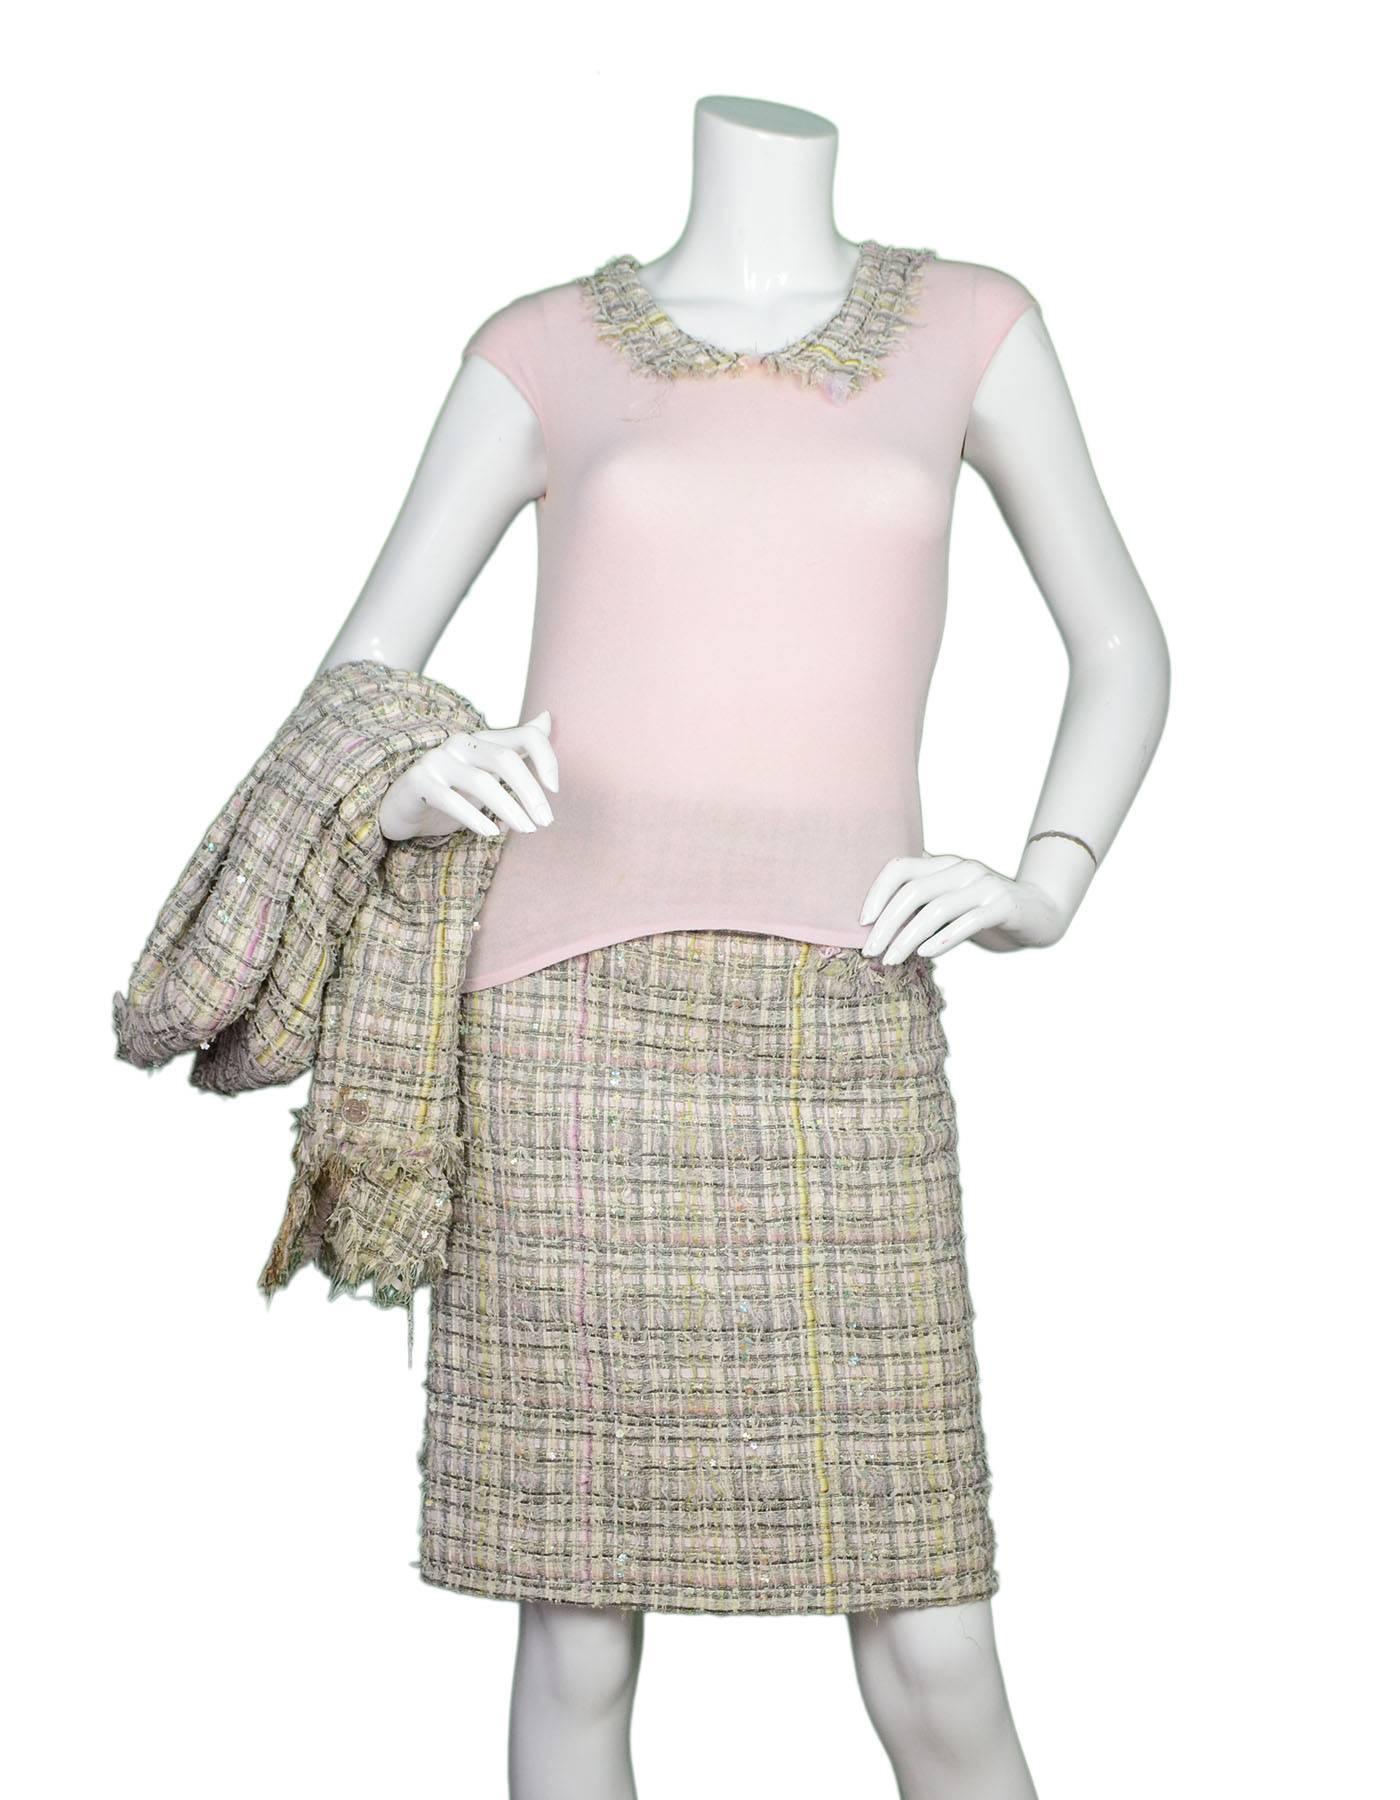 Chanel Grey & Pink 3-Piece Fantasy Tweed Suit 
Top features decorative tweed collar and perforated CC at neckline

Made In: France
Year of Production: 2005
Color: Pink, grey, green, yellow
Composition: Jacket + Skirt- 34% viscose, 25% nylon,